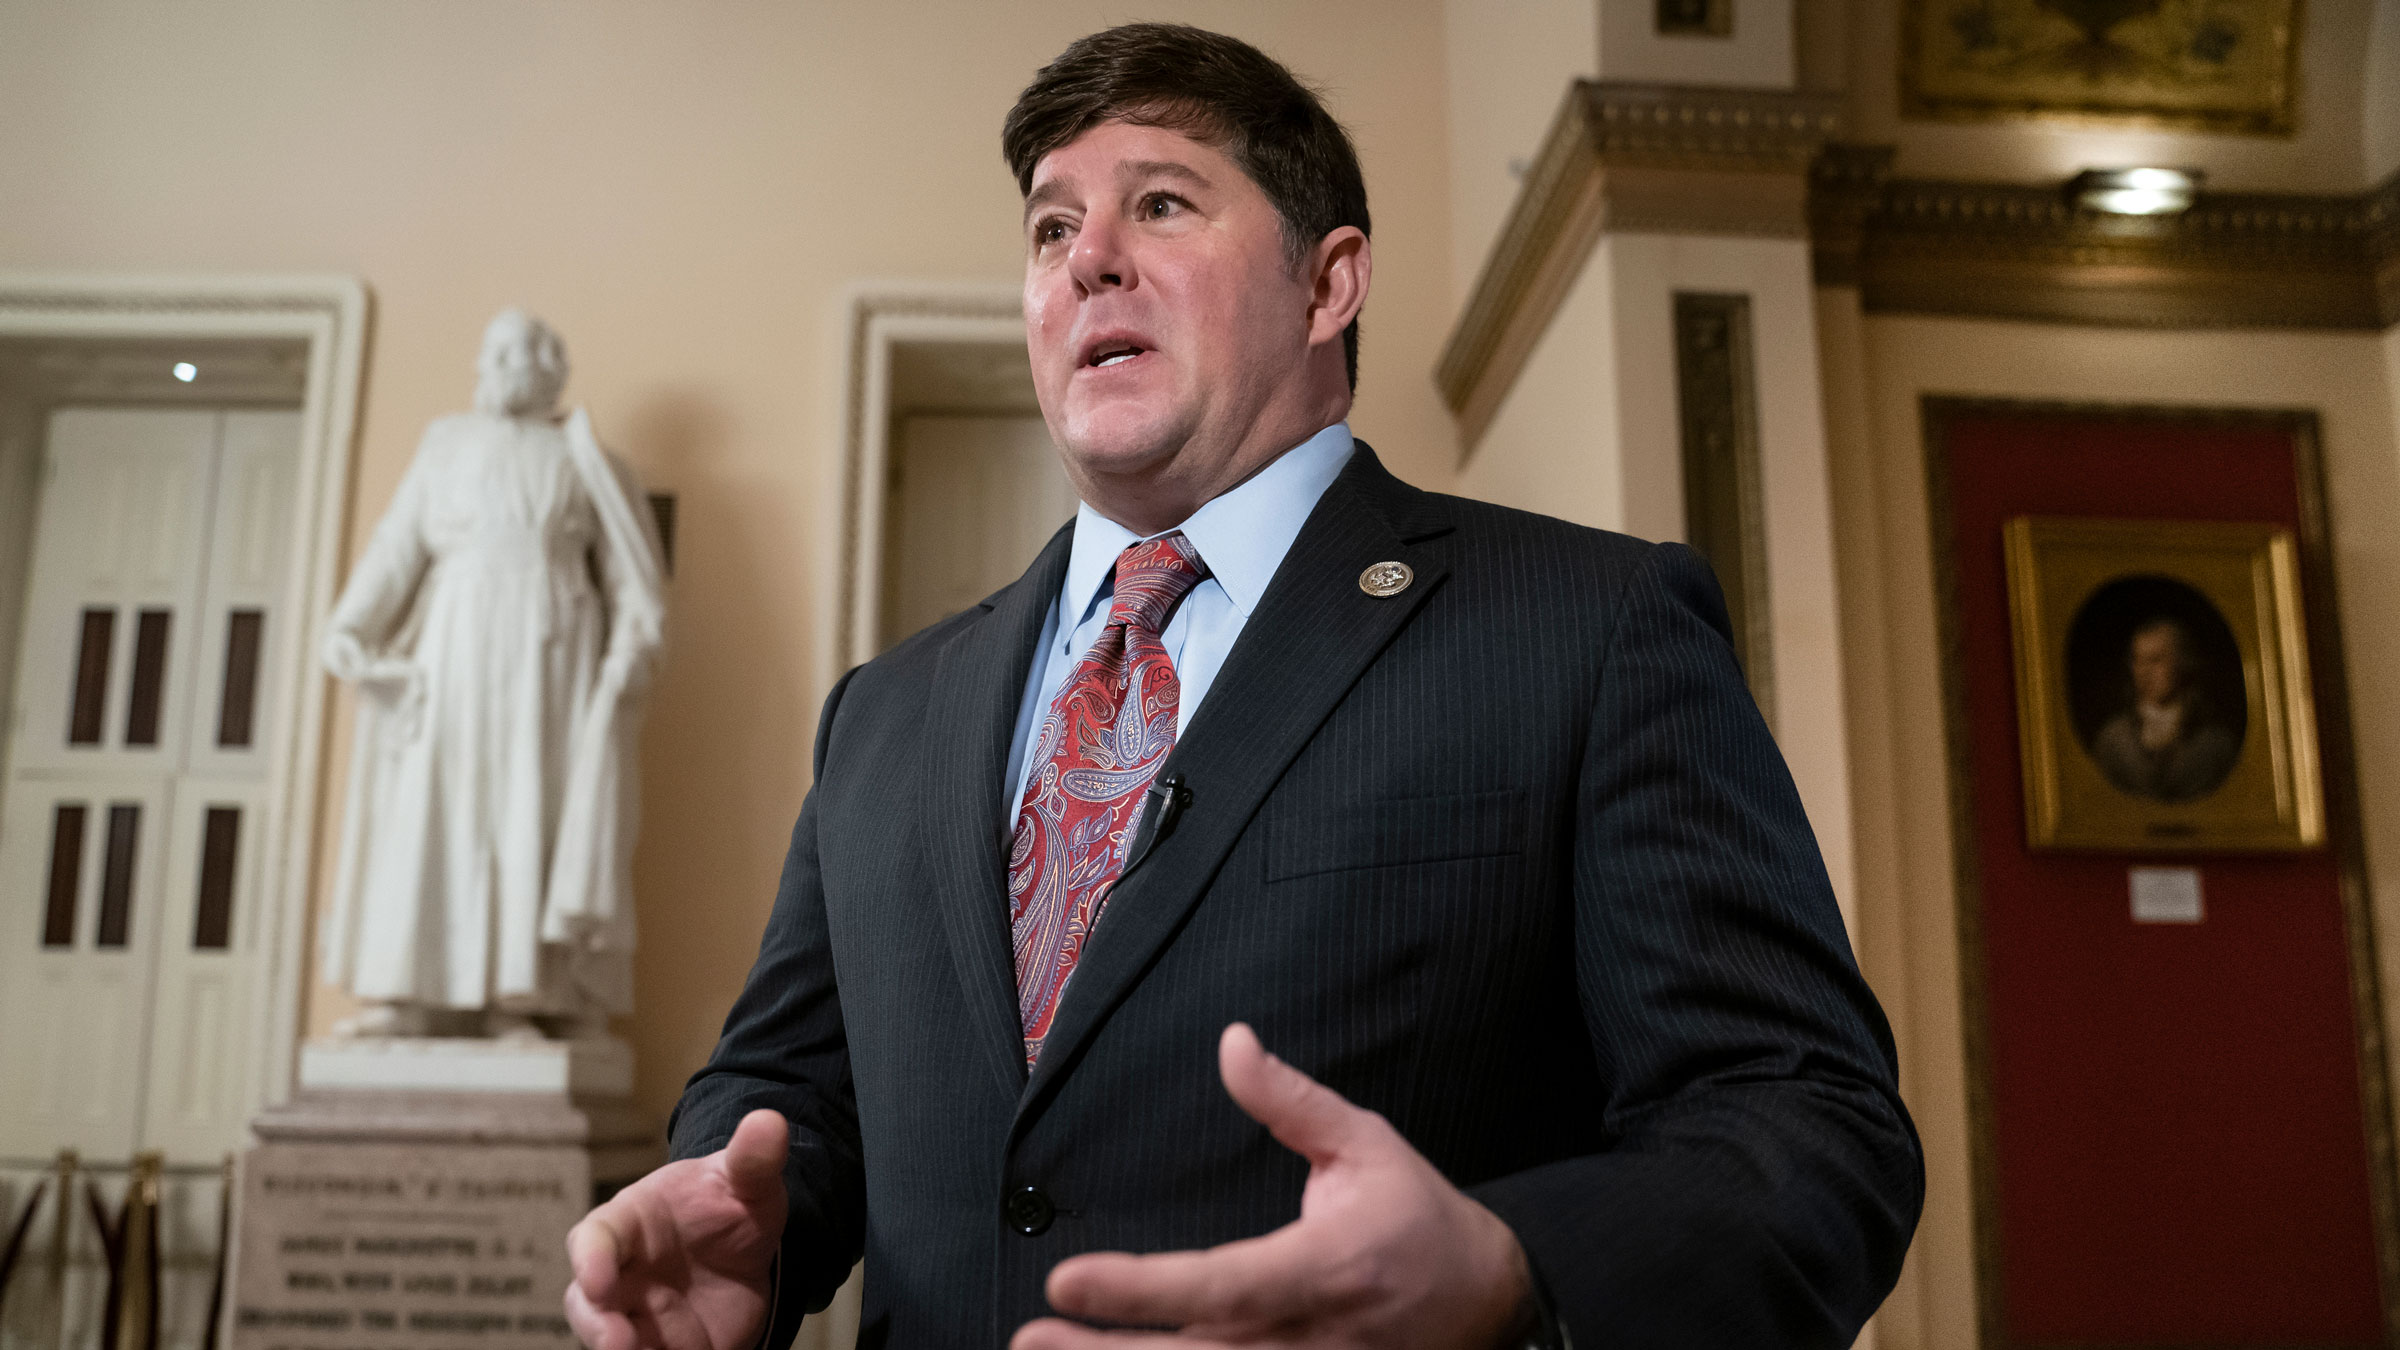 CNN Projection: Rep. Steven Palazzo will advance to a runoff in Mississippi GOP primary 